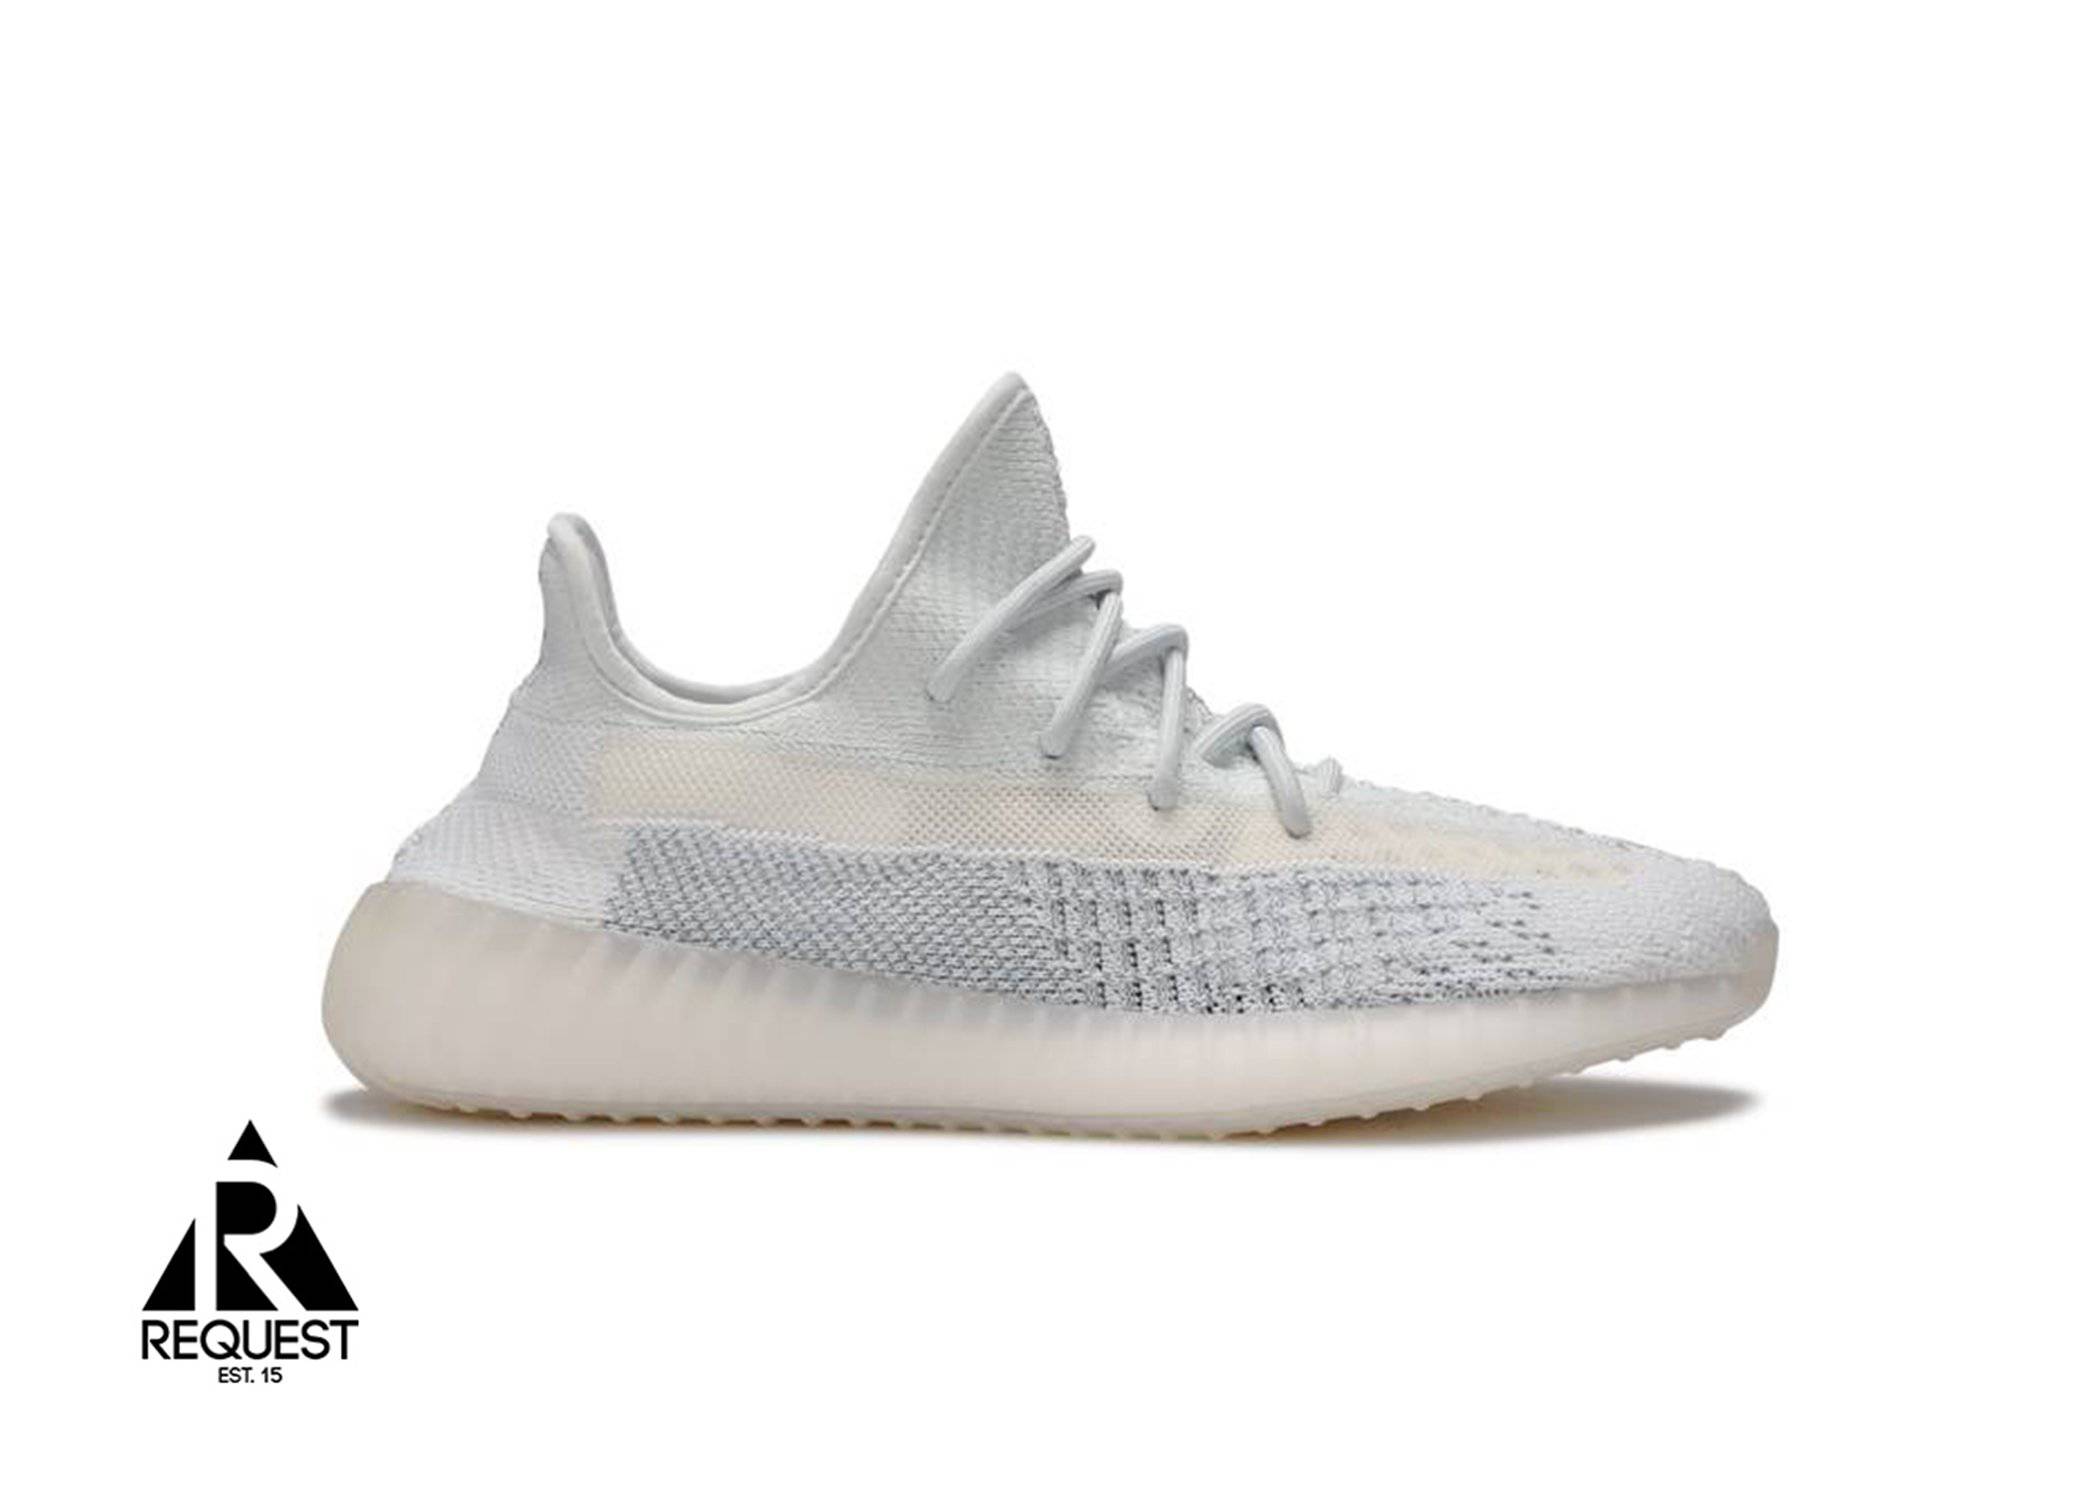 Adidas Yeezy Boost 350 V2 “Cloud White Reflective”